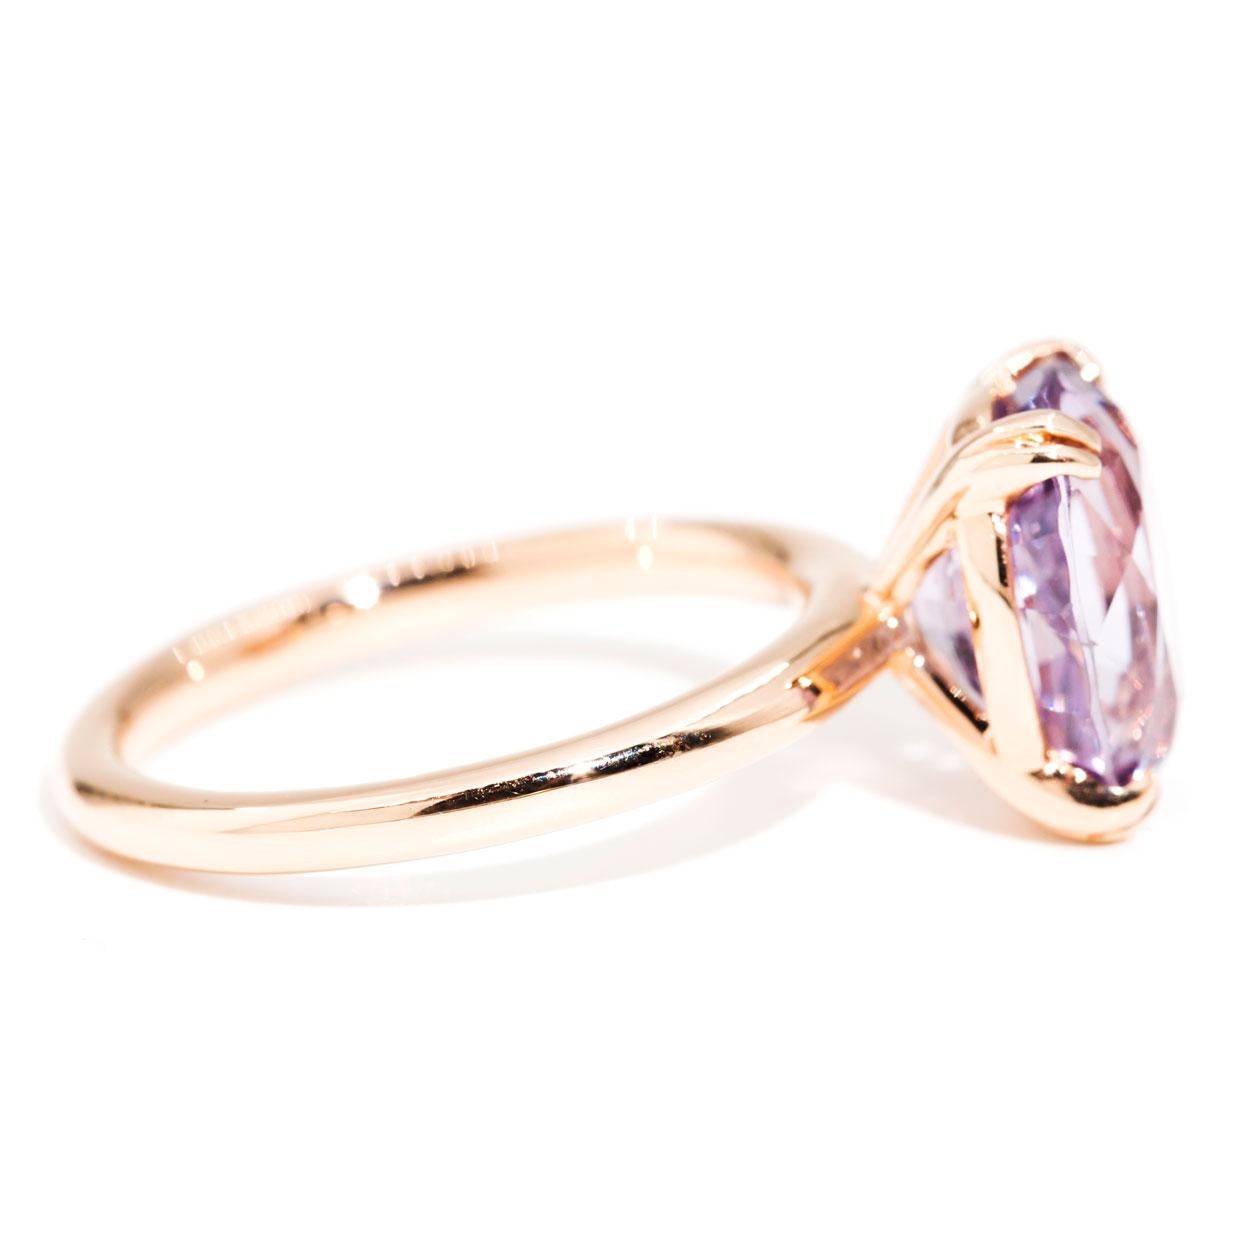 Contemporary 4.7 Carat Oval Purple Spinel Solitaire Cocktail Ring in 18 Carat Rose Gold